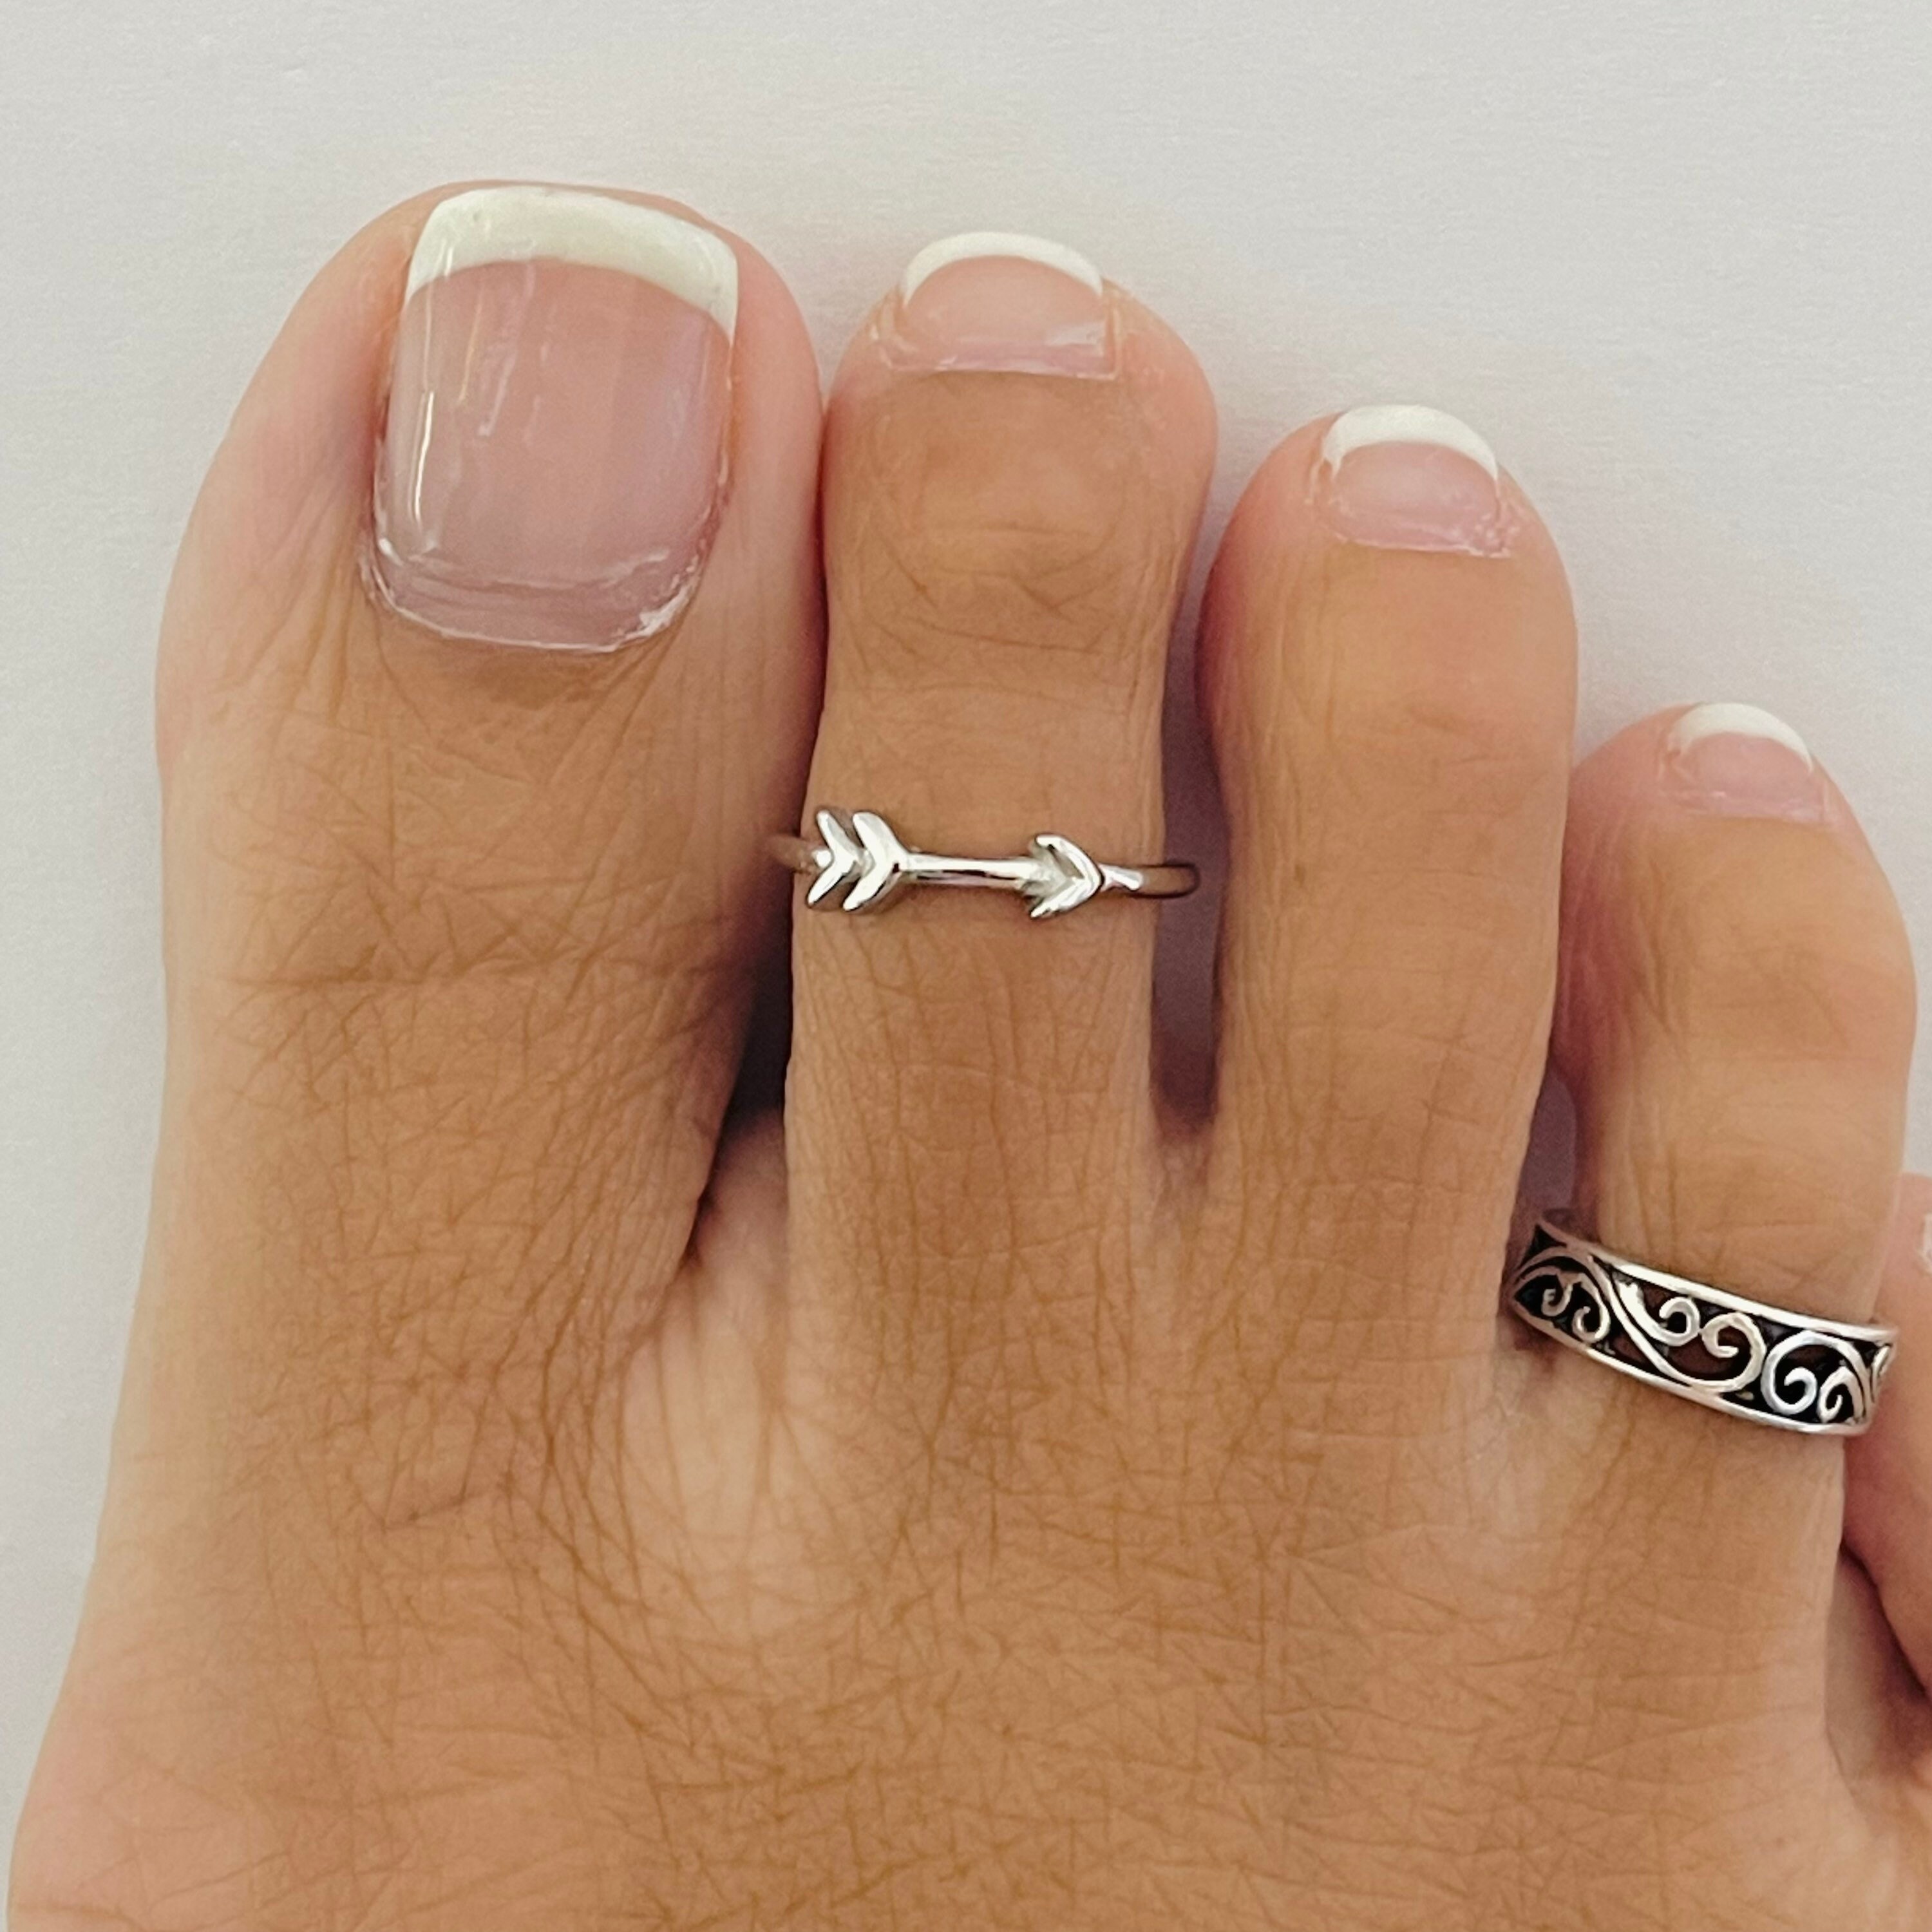 ADRAMATA 3pcs 925 Sterling Silver Toe Rings For Women Girls Adjustable Finger Knuckle Rings Set Open Thumb Rings Beach Summer Gold Silver Toe Rings